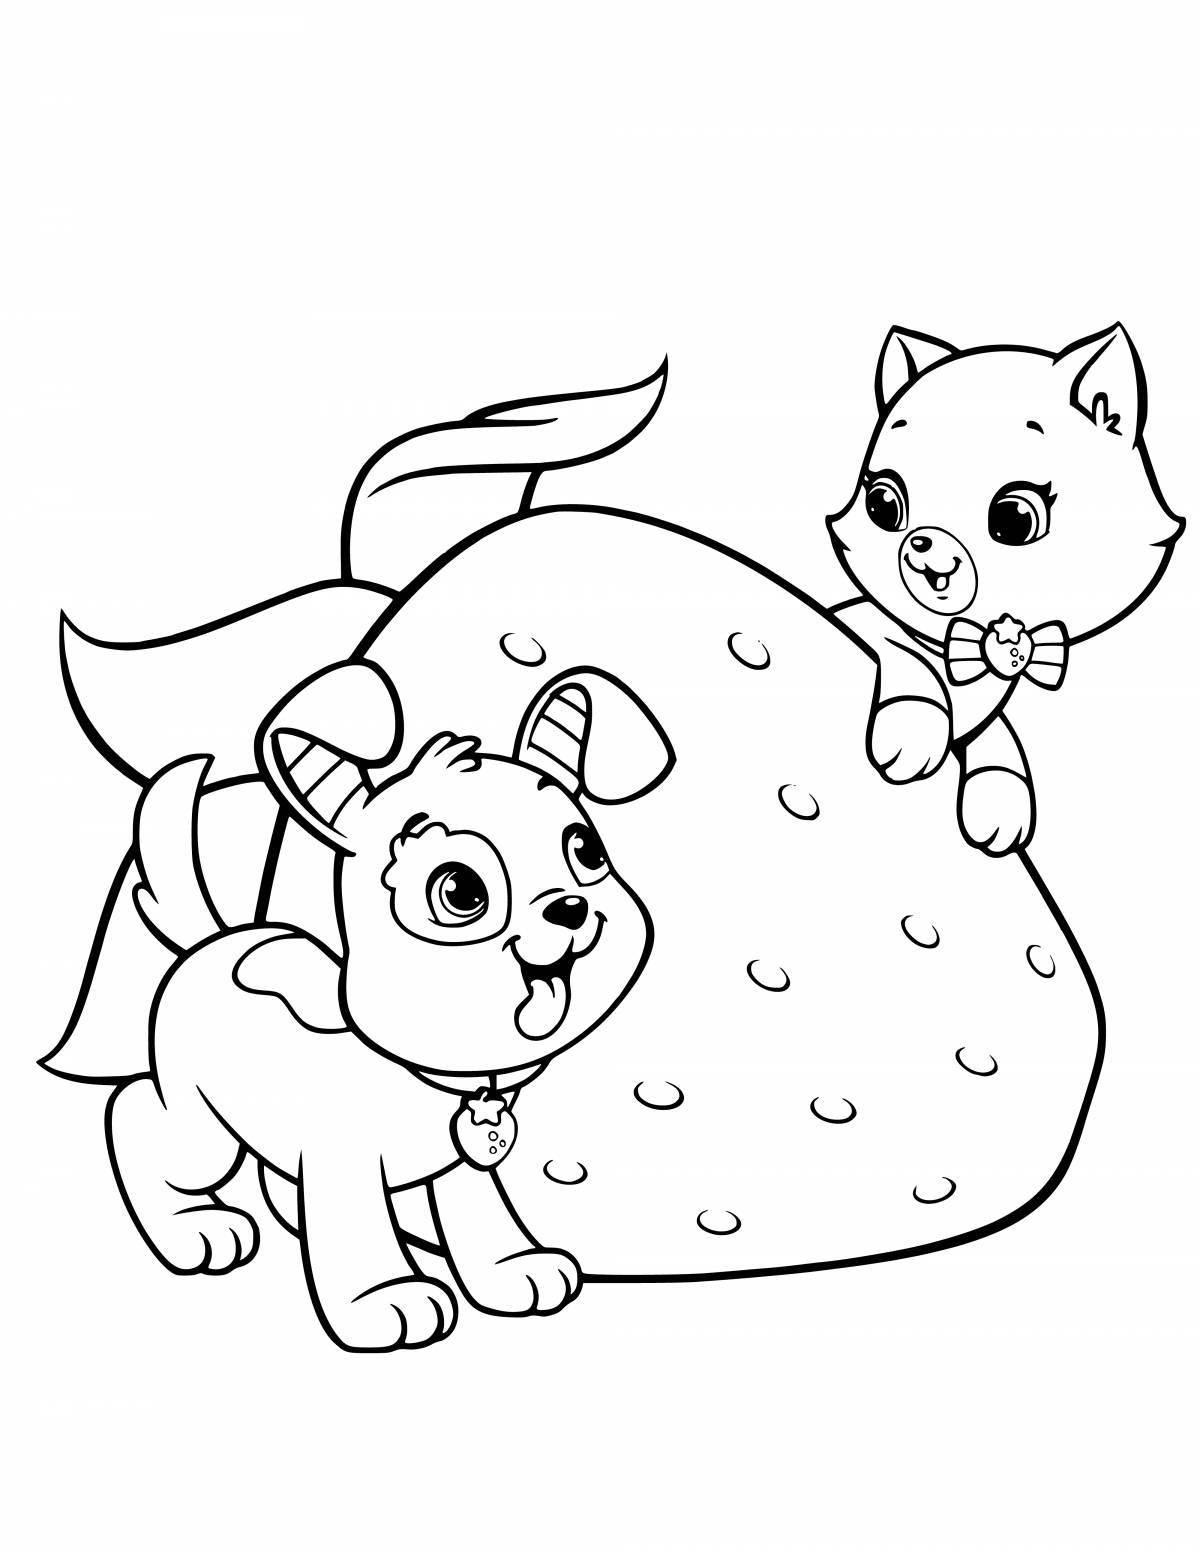 Coloring page funny cat and puppy